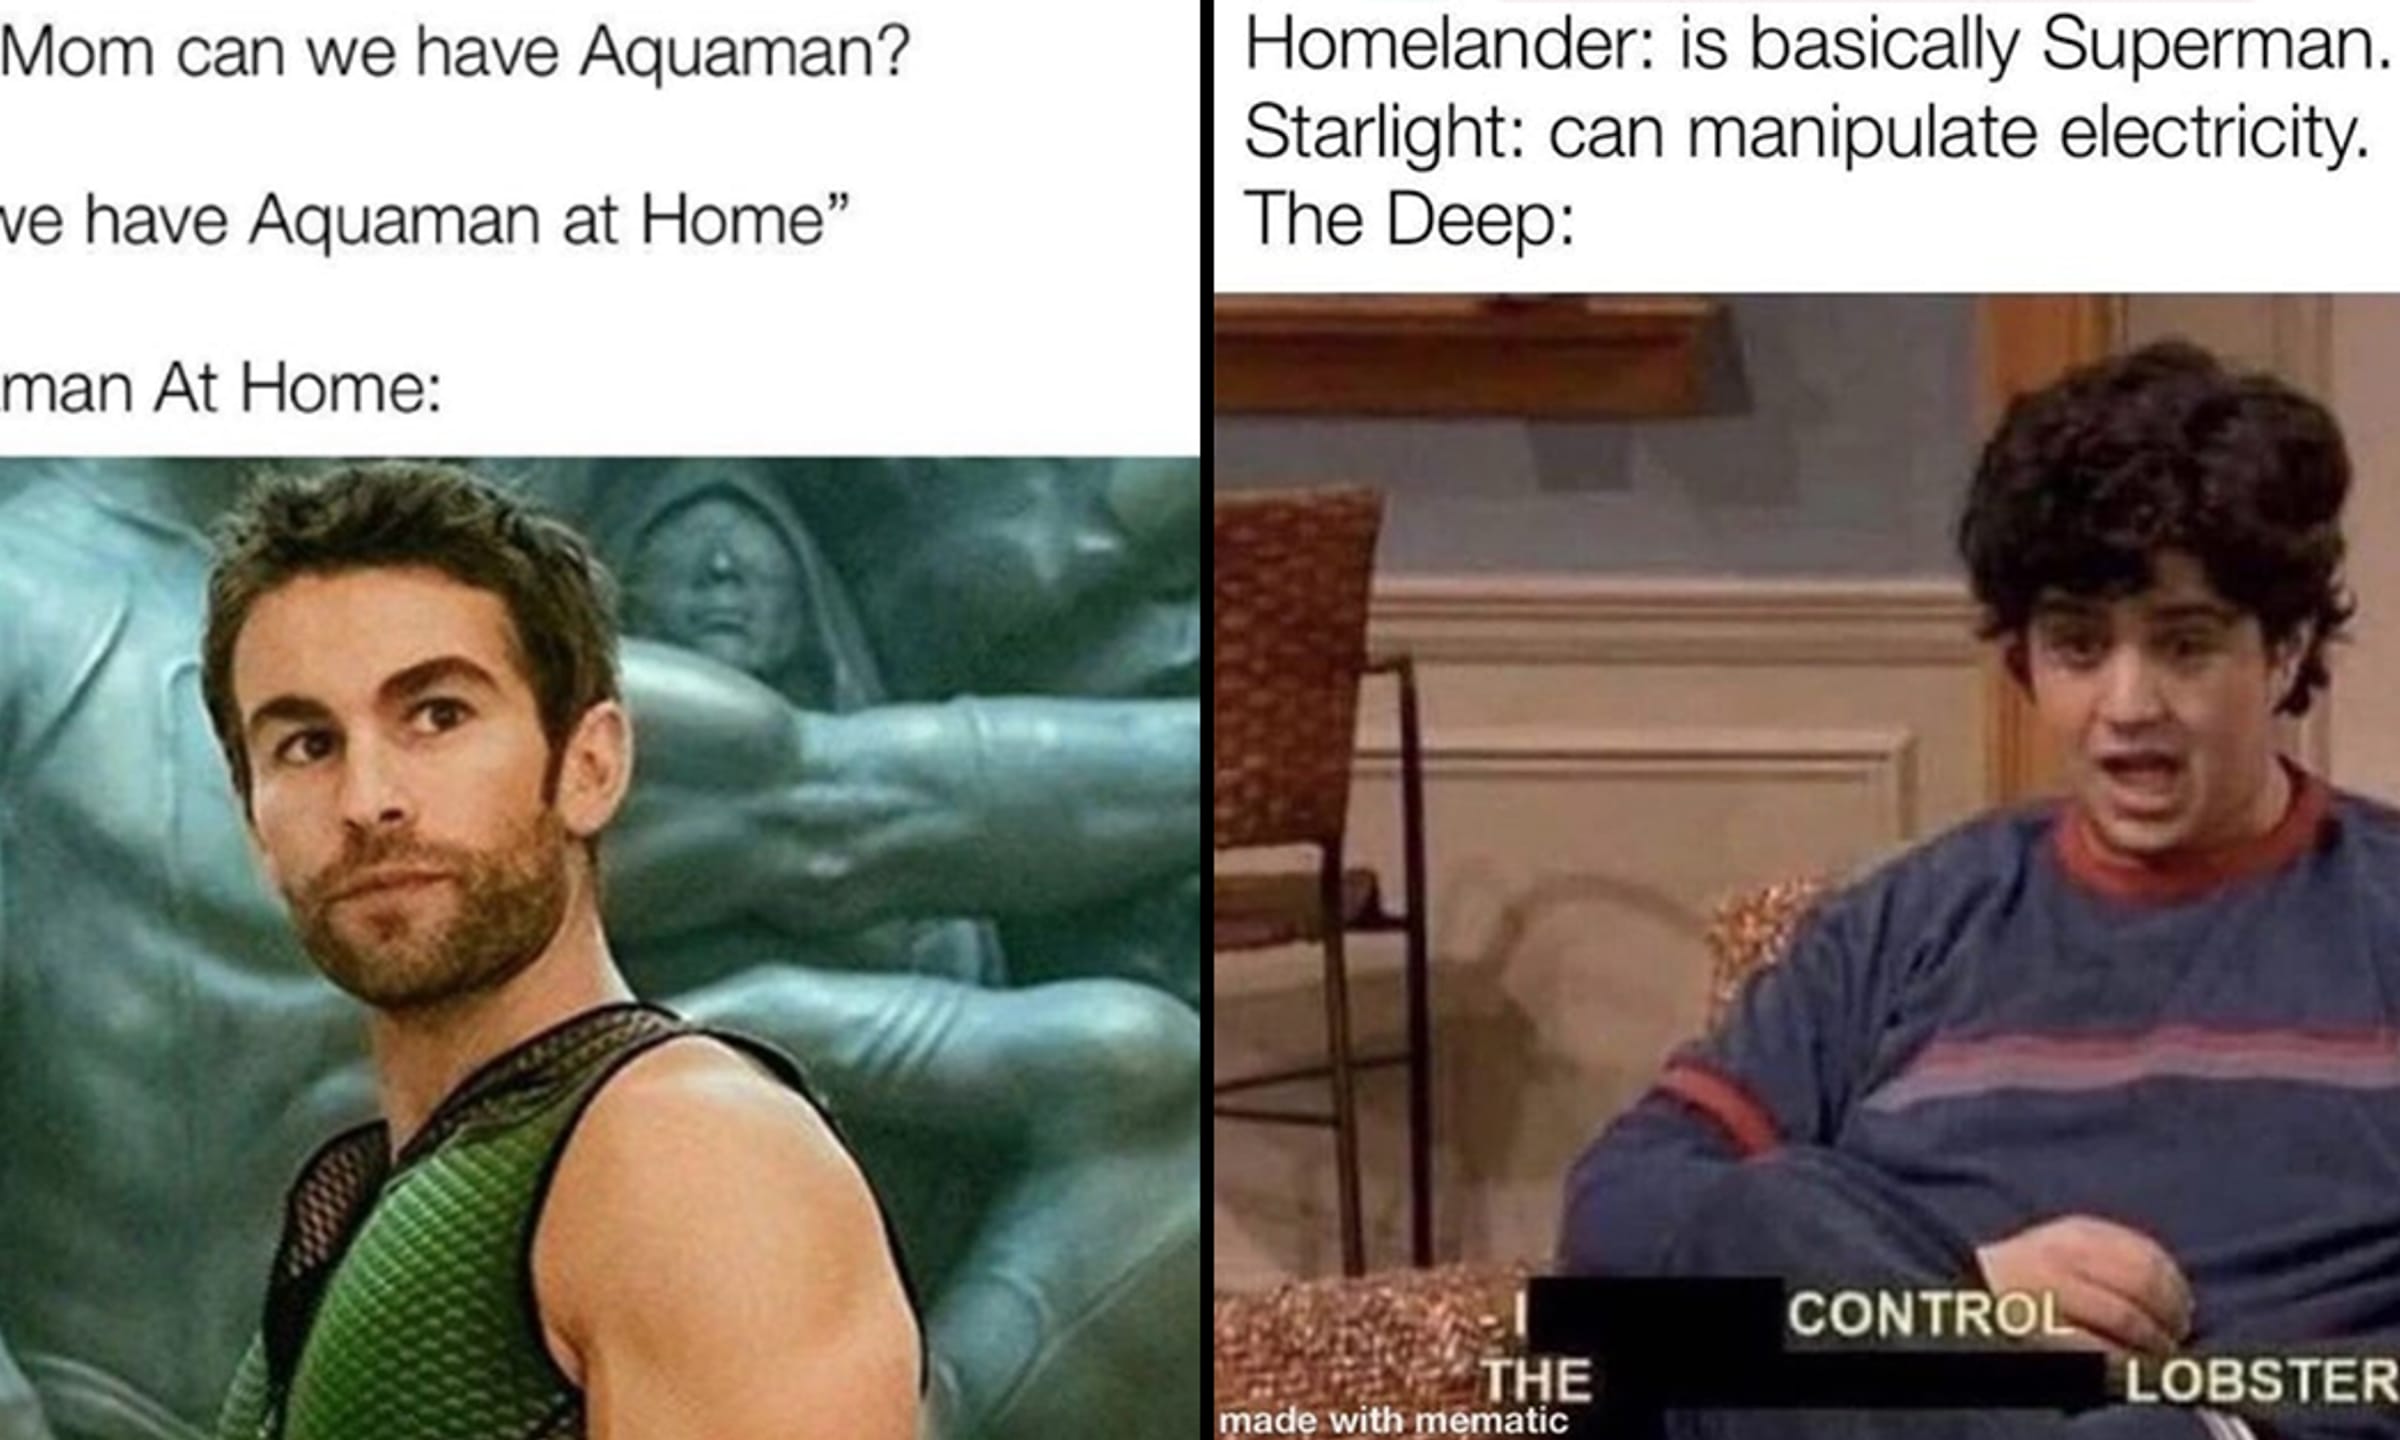 17 Funny Memes About The Deep, The Superhero From 'The Boys